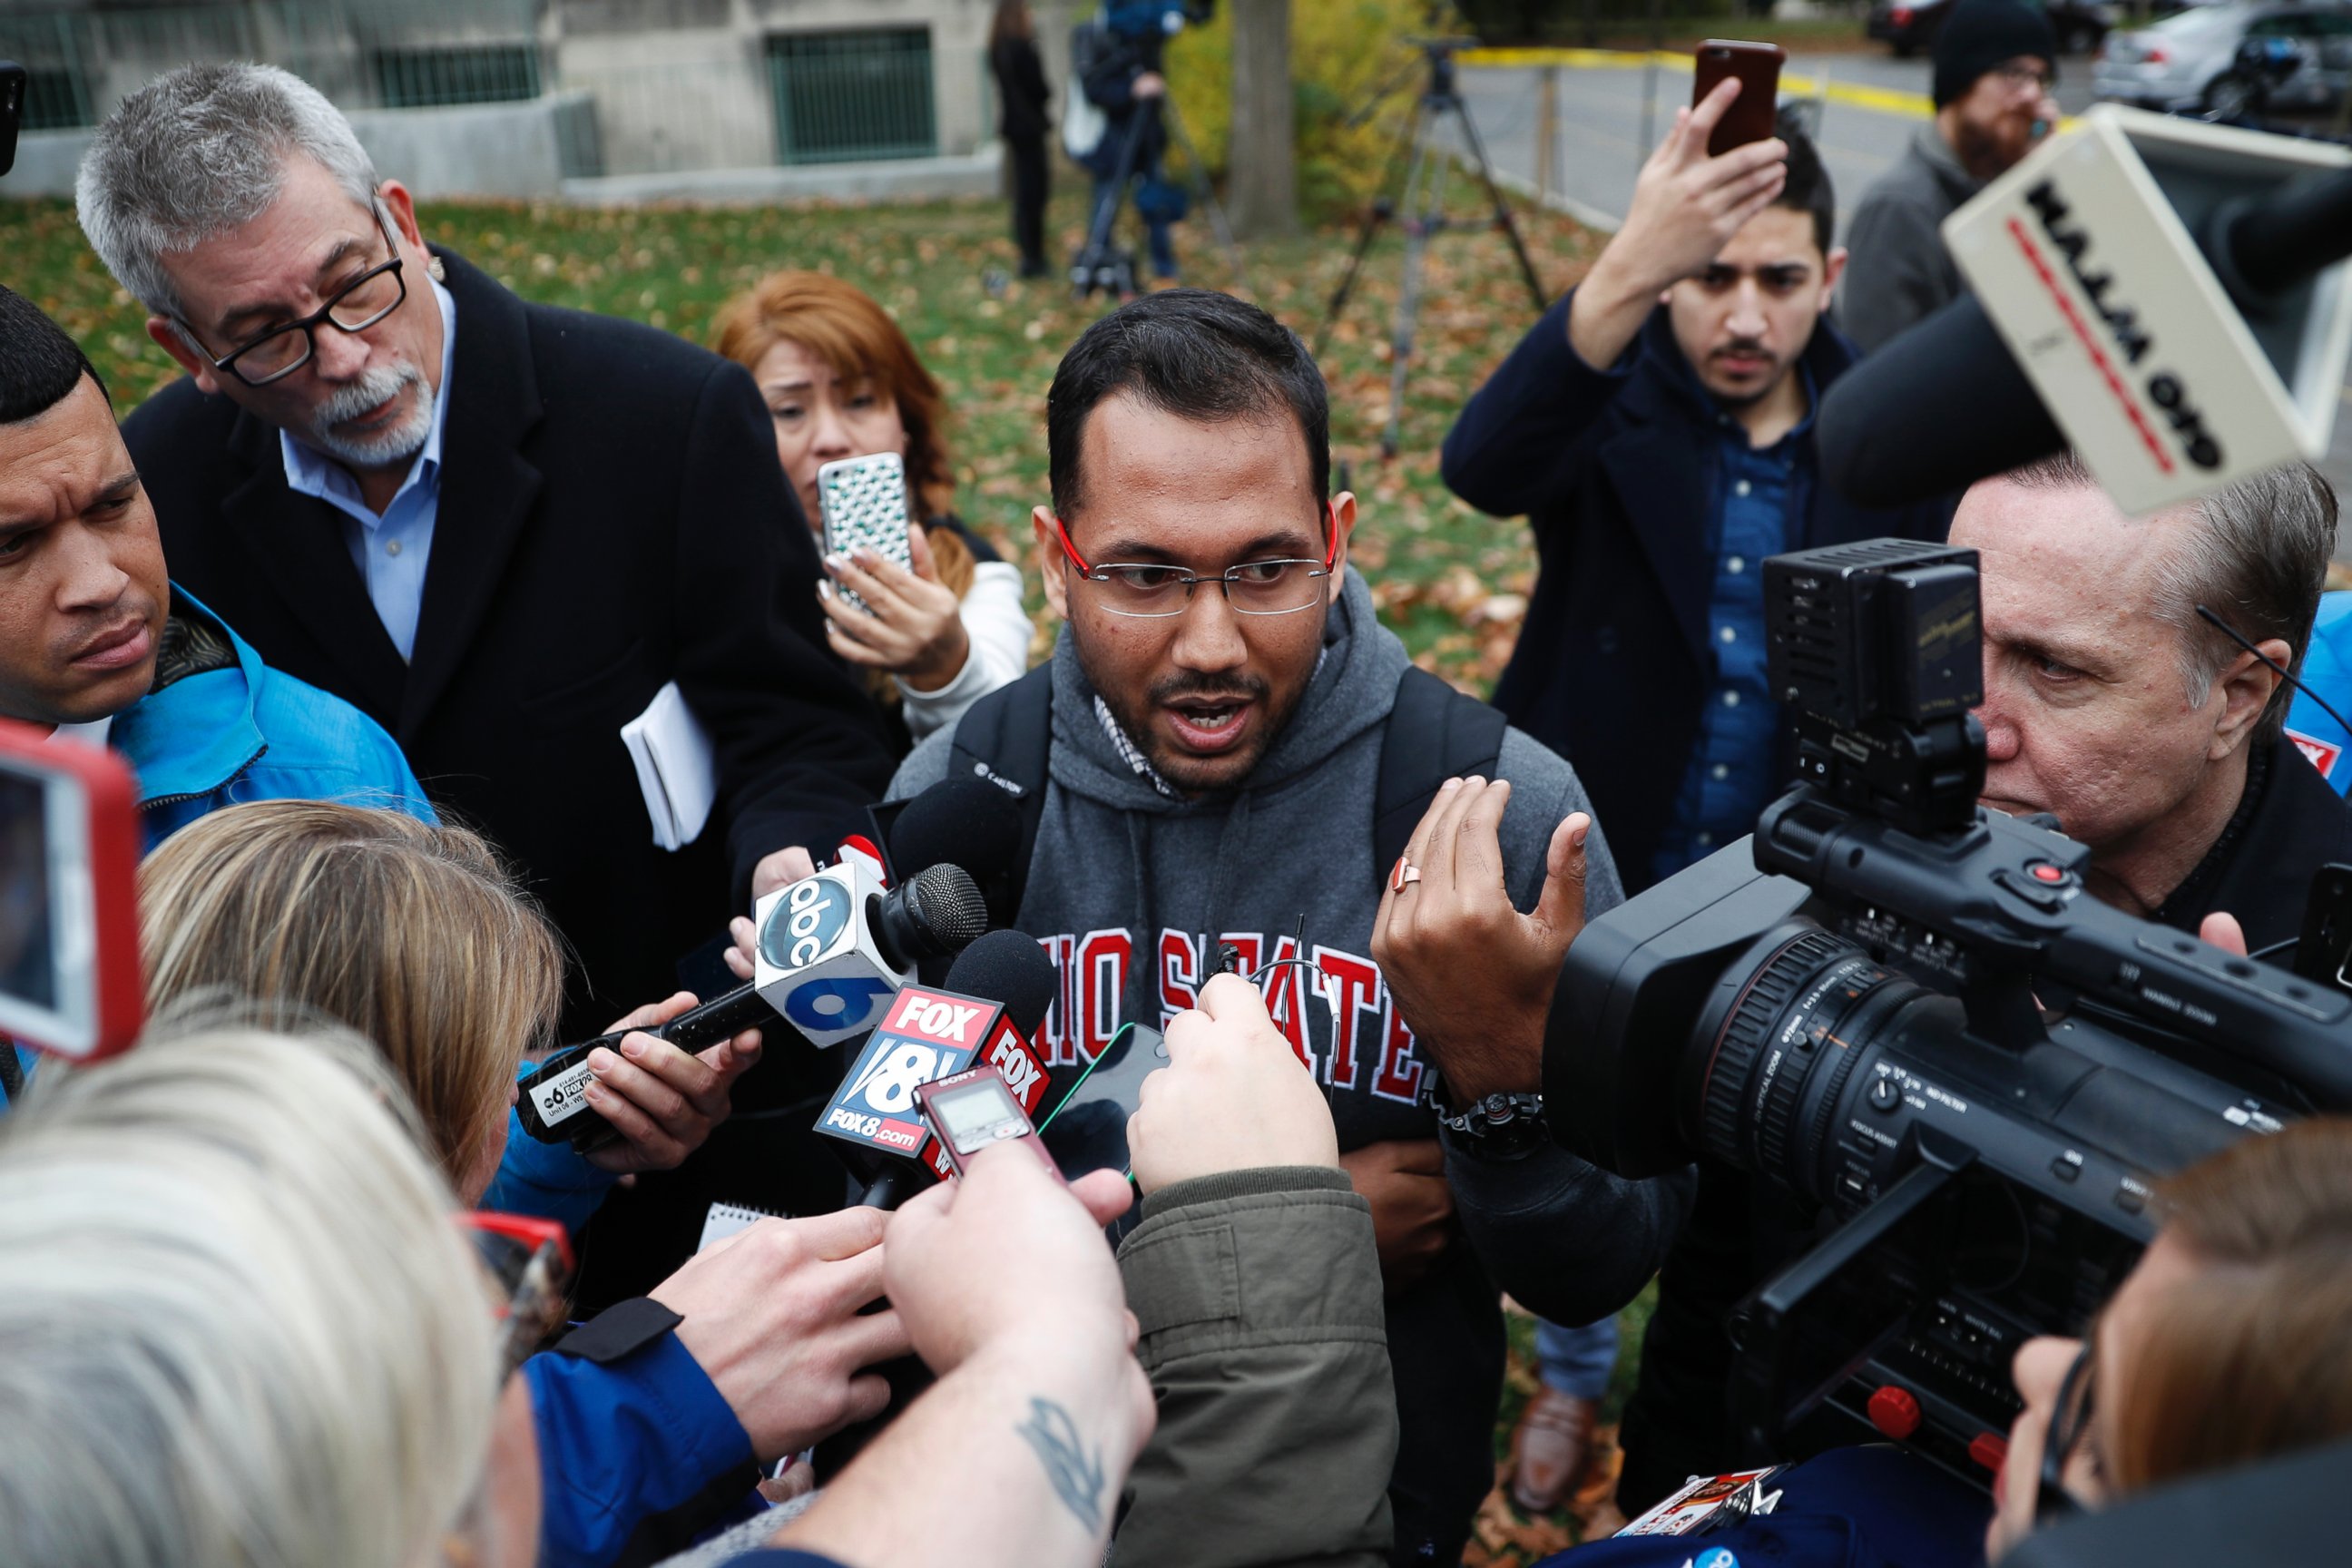 PHOTO: Angshuman Kapil, a graduate student at Ohio State University, speaks to members of the media as police investigate an attack on campus, Monday, Nov. 28, 2016, in Columbus, Ohio.